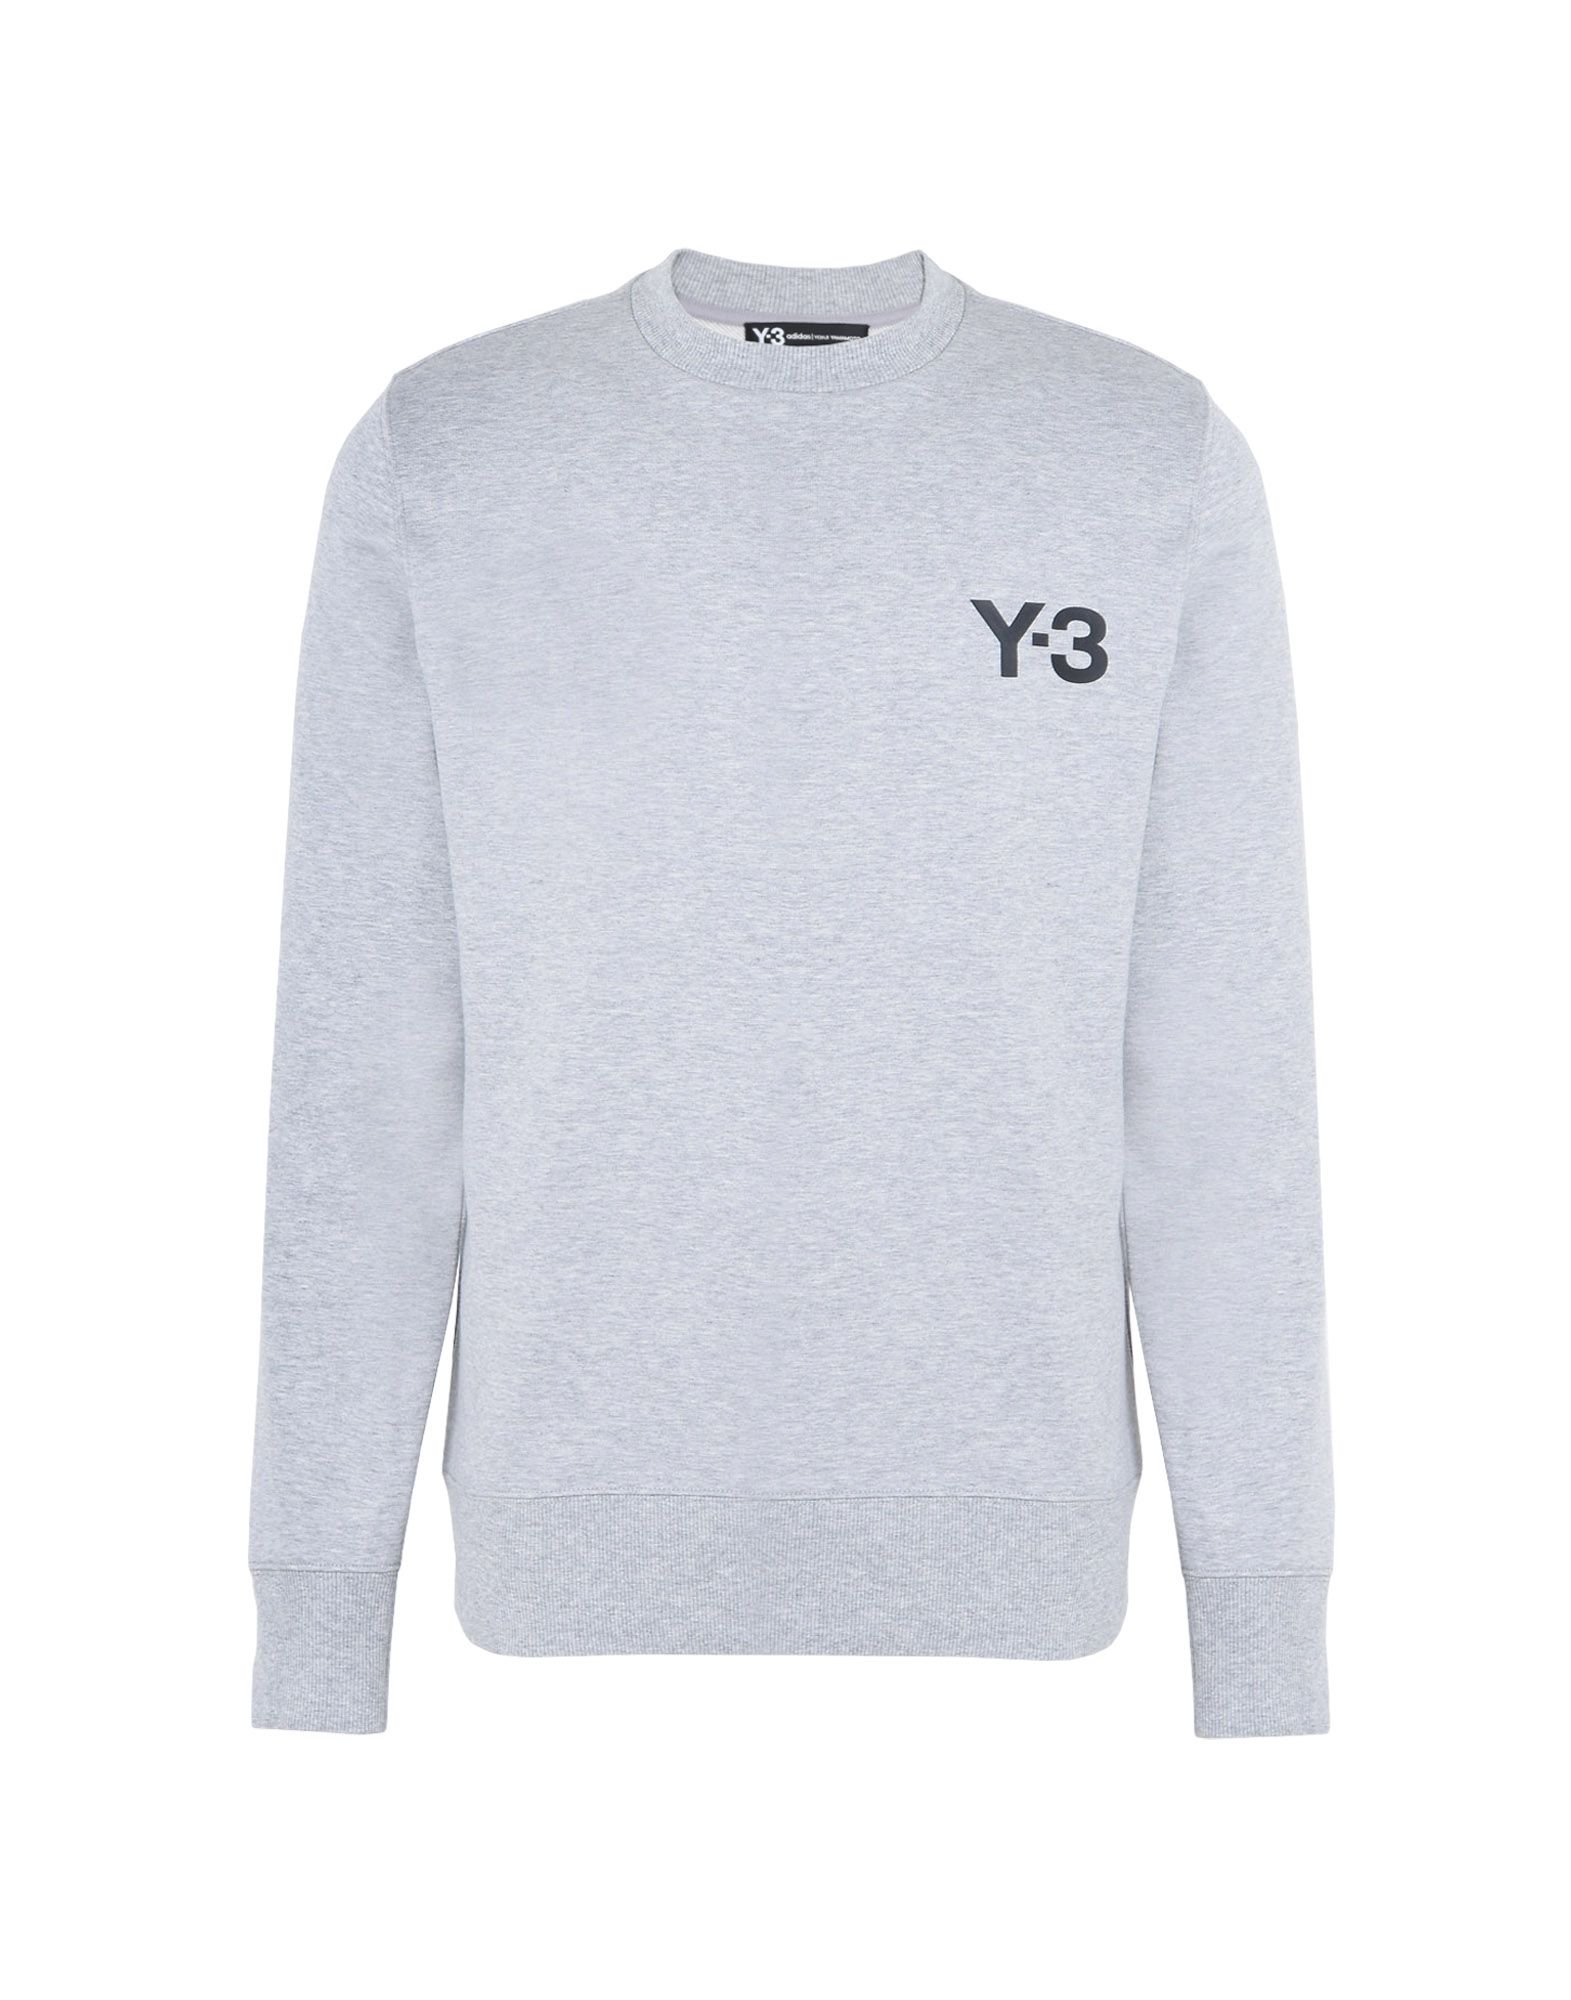 Y 3 CLASSIC SWEATER for Men | Adidas Y-3 Official Store